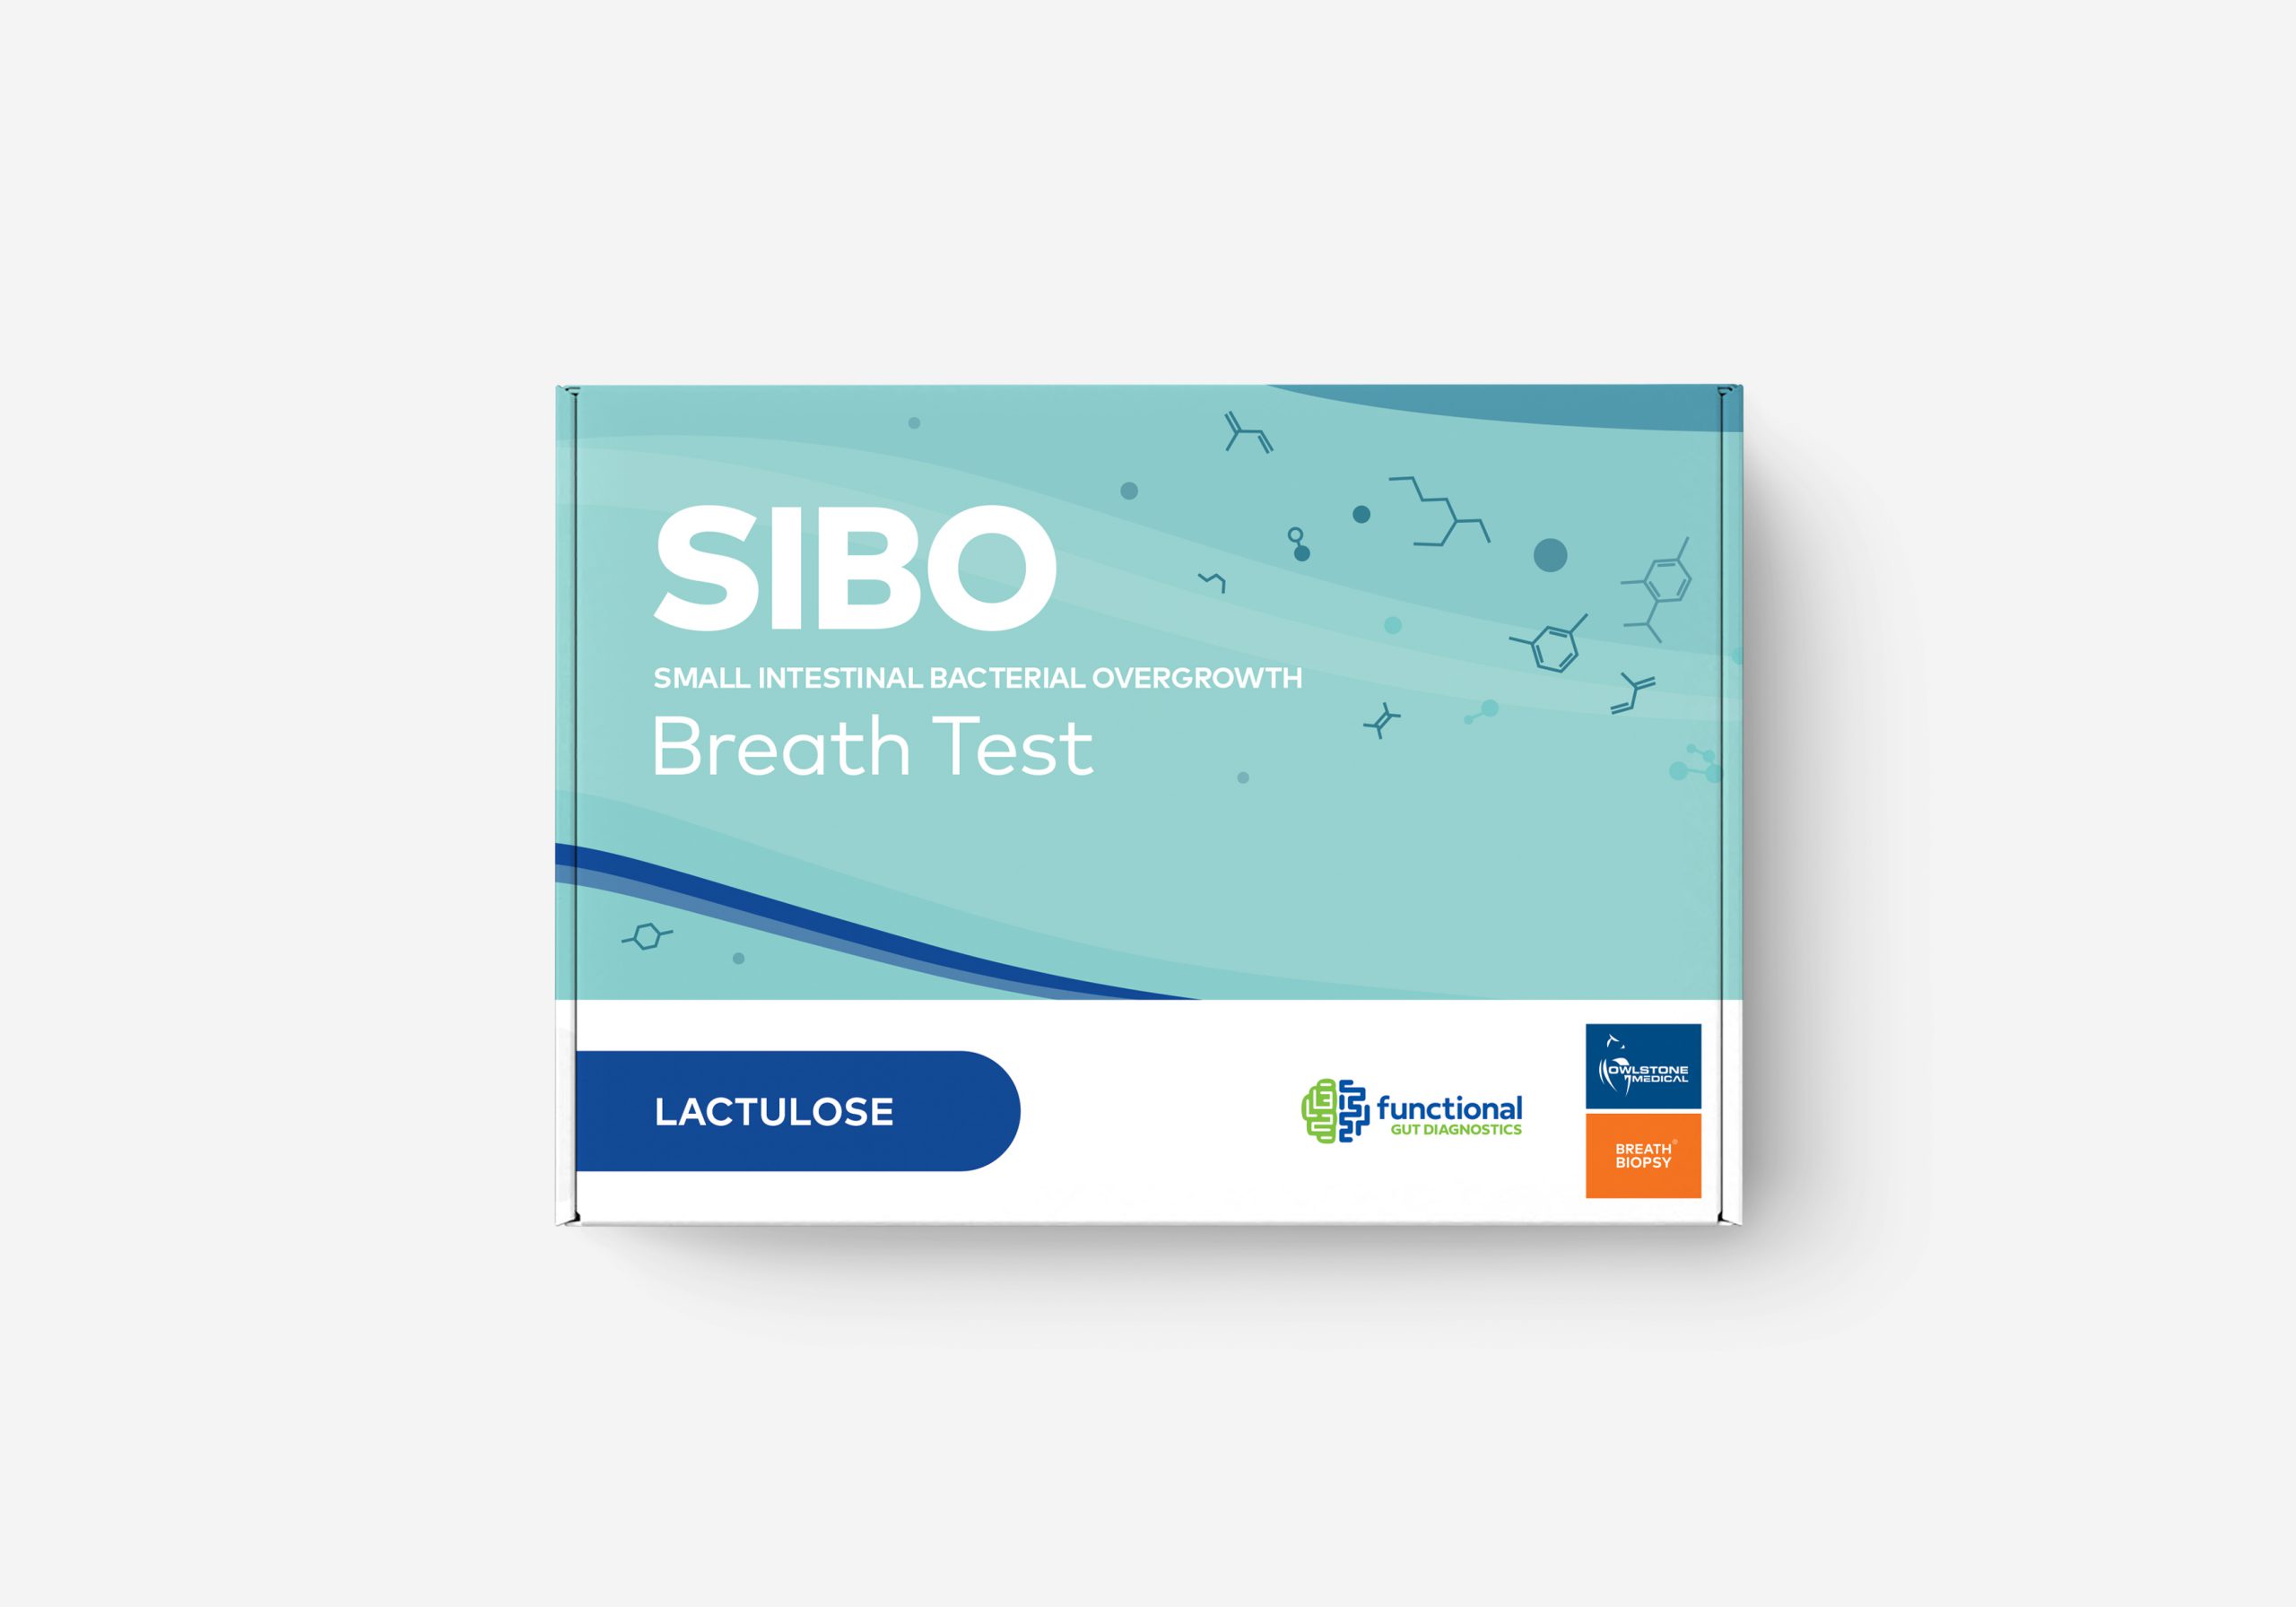 Small Intestinal Bacterial Overgrowth (SIBO) Lactulose Breath Test order form